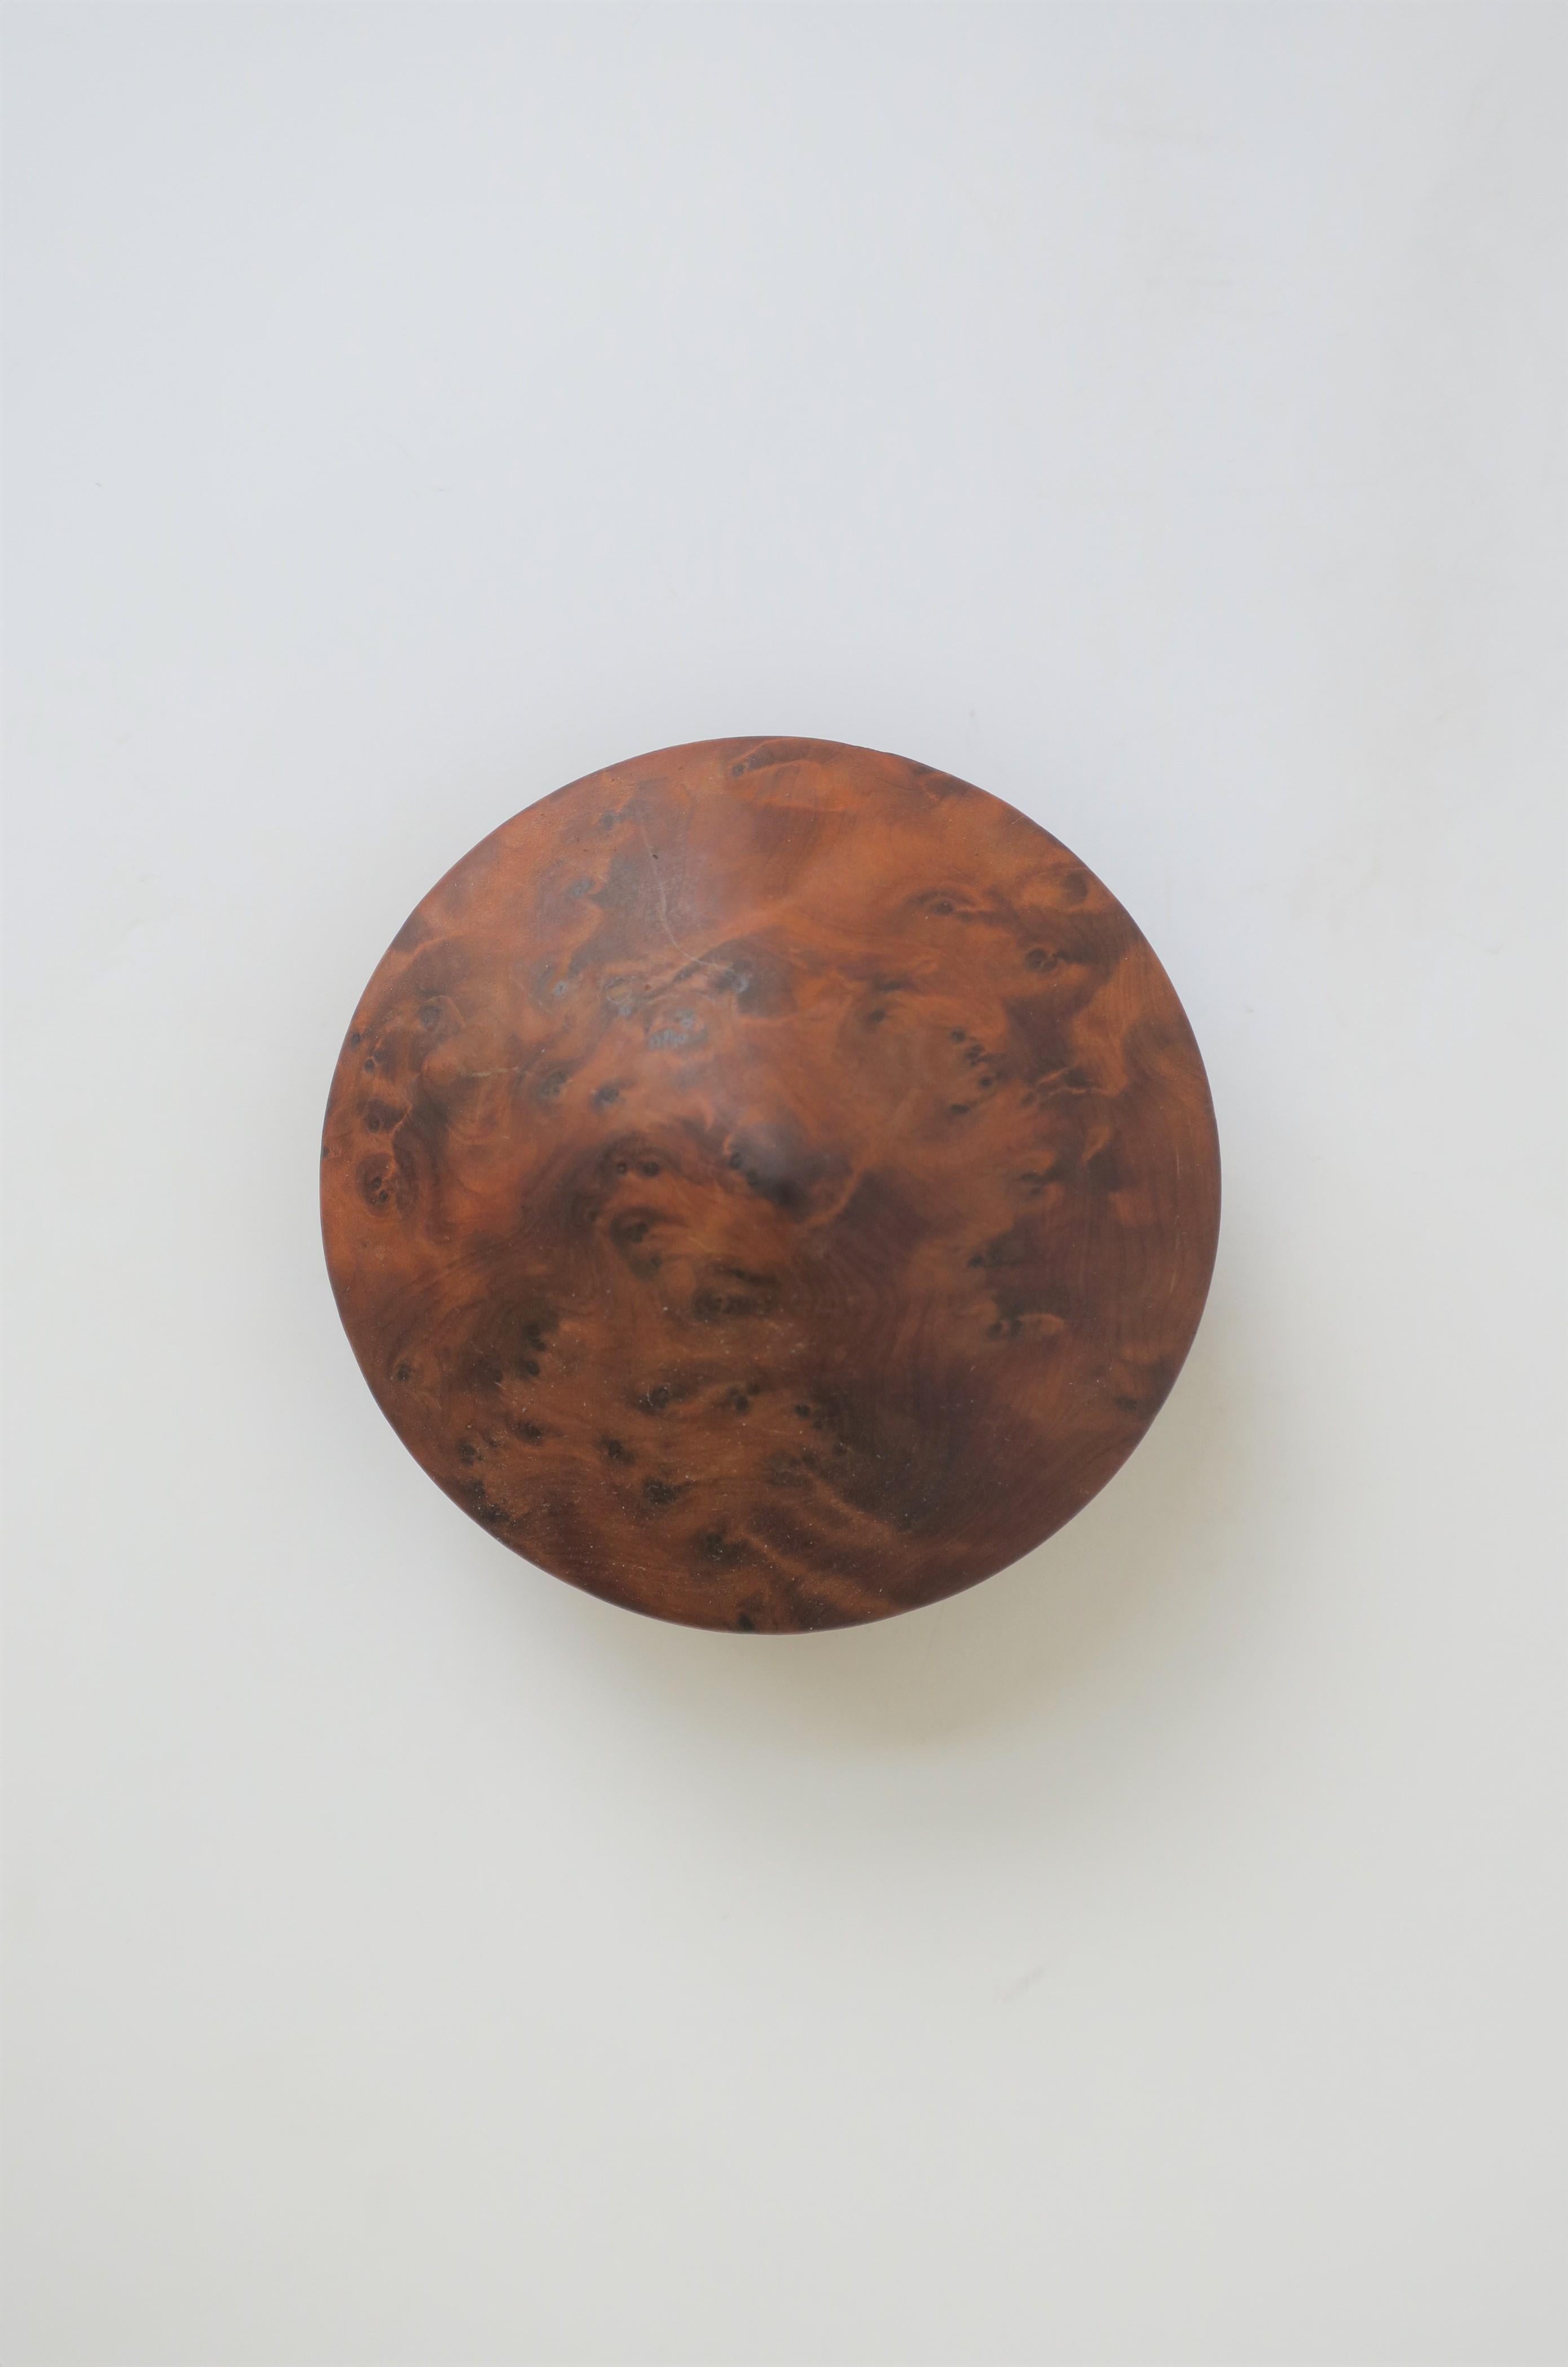 A small round burl wood trinket or jewelry box with pyramid-like top. Perfect for any desk or vanity area to hold small items. Shown with cocktail ring (available separately.) Dimensions: 2.75